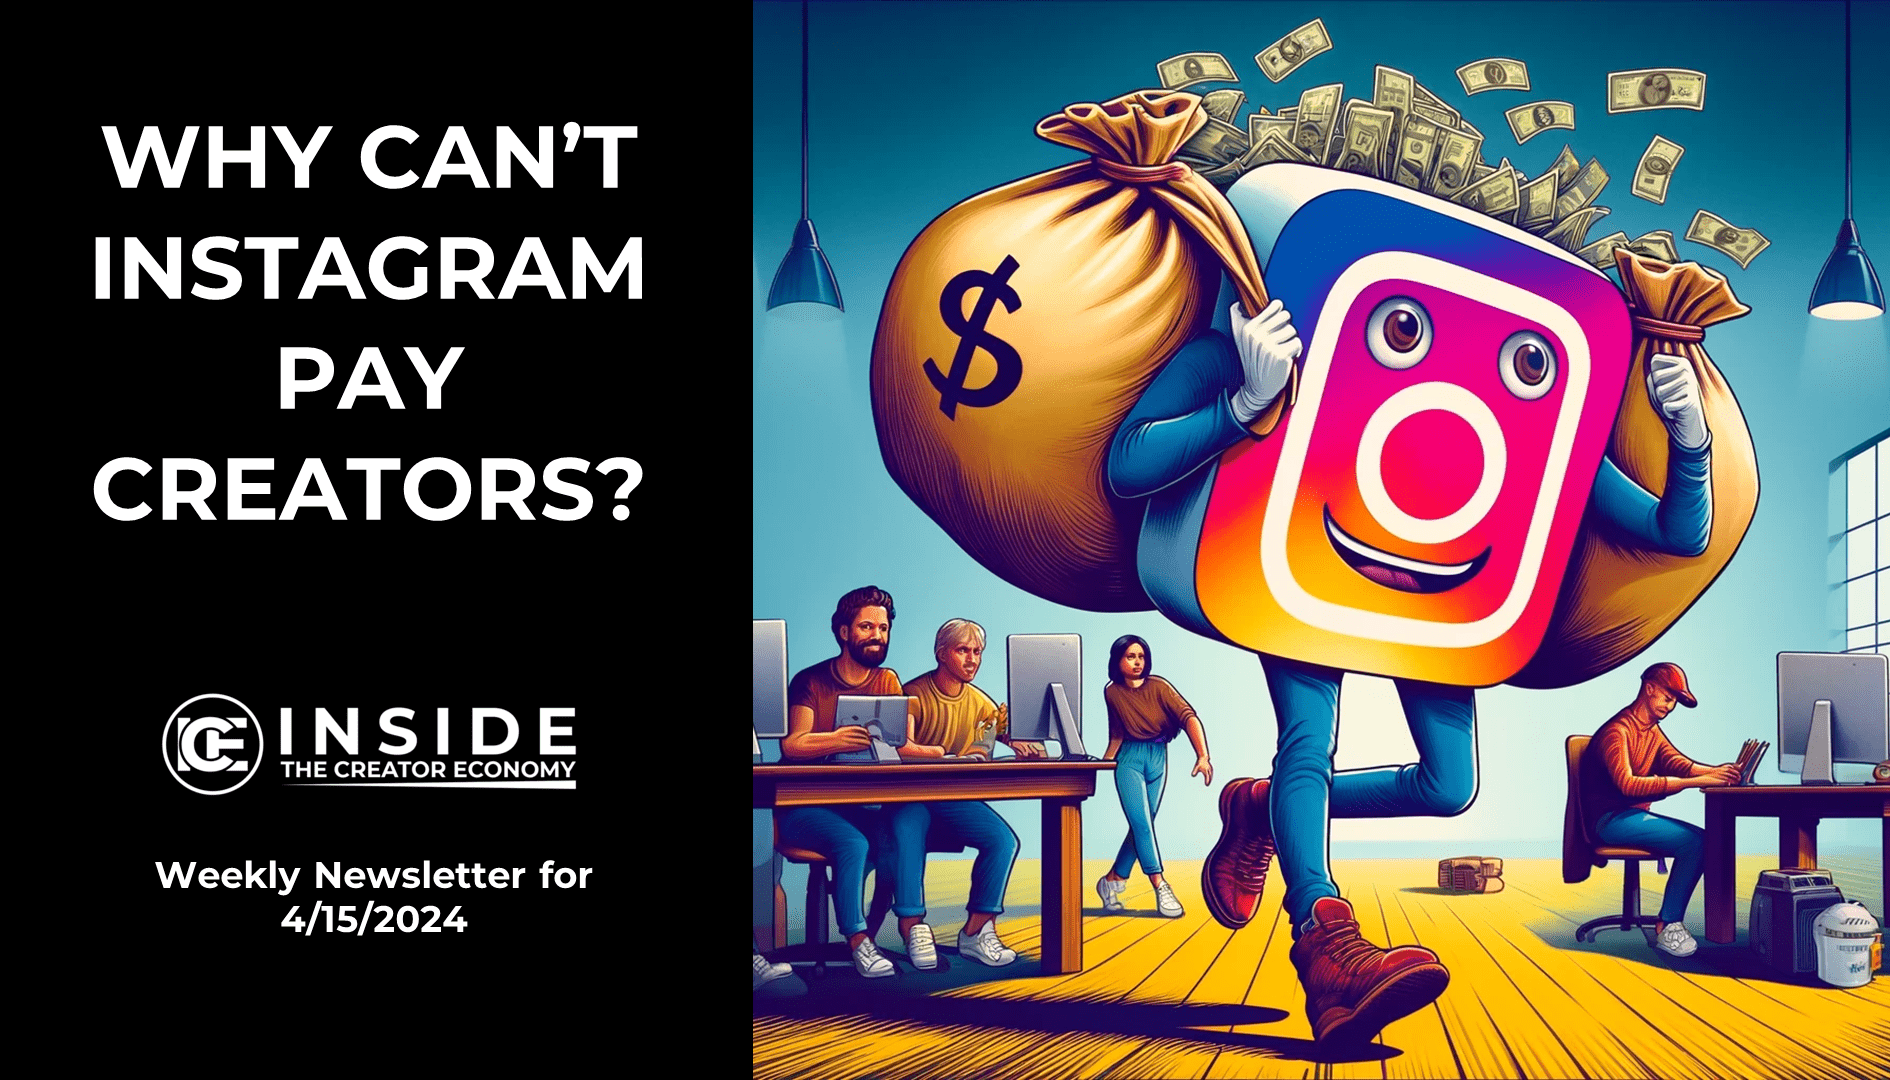 Instagram running away with cash. Creators are crying